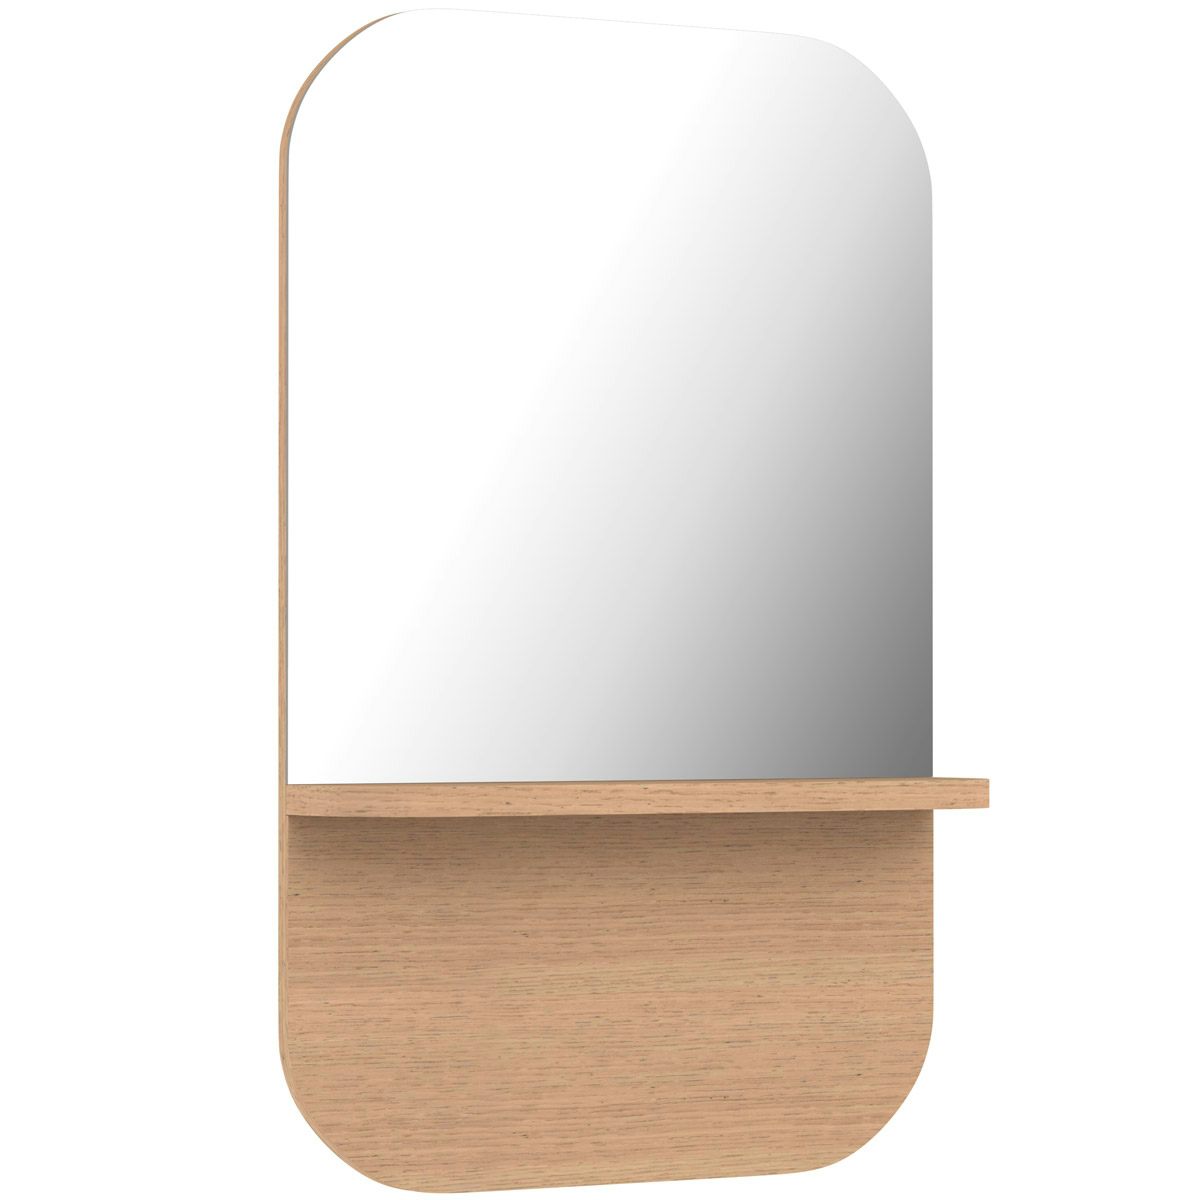 Accents Lund wall mirror with shelf